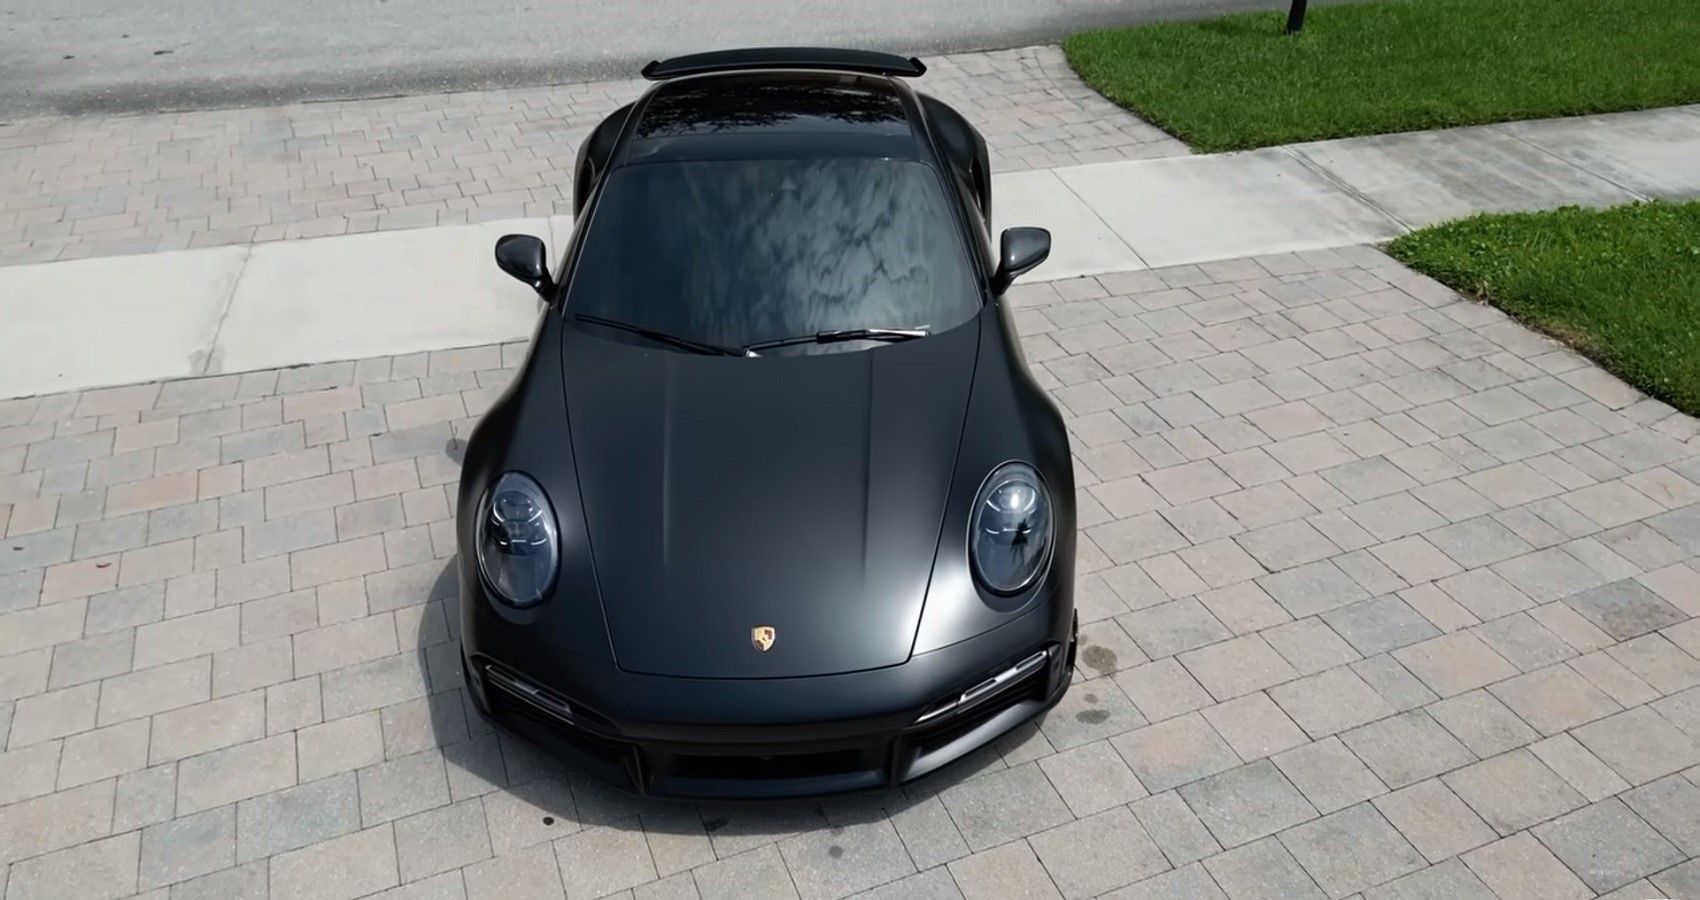 992 Porsche 911 Turbo S Build, front profile view from above